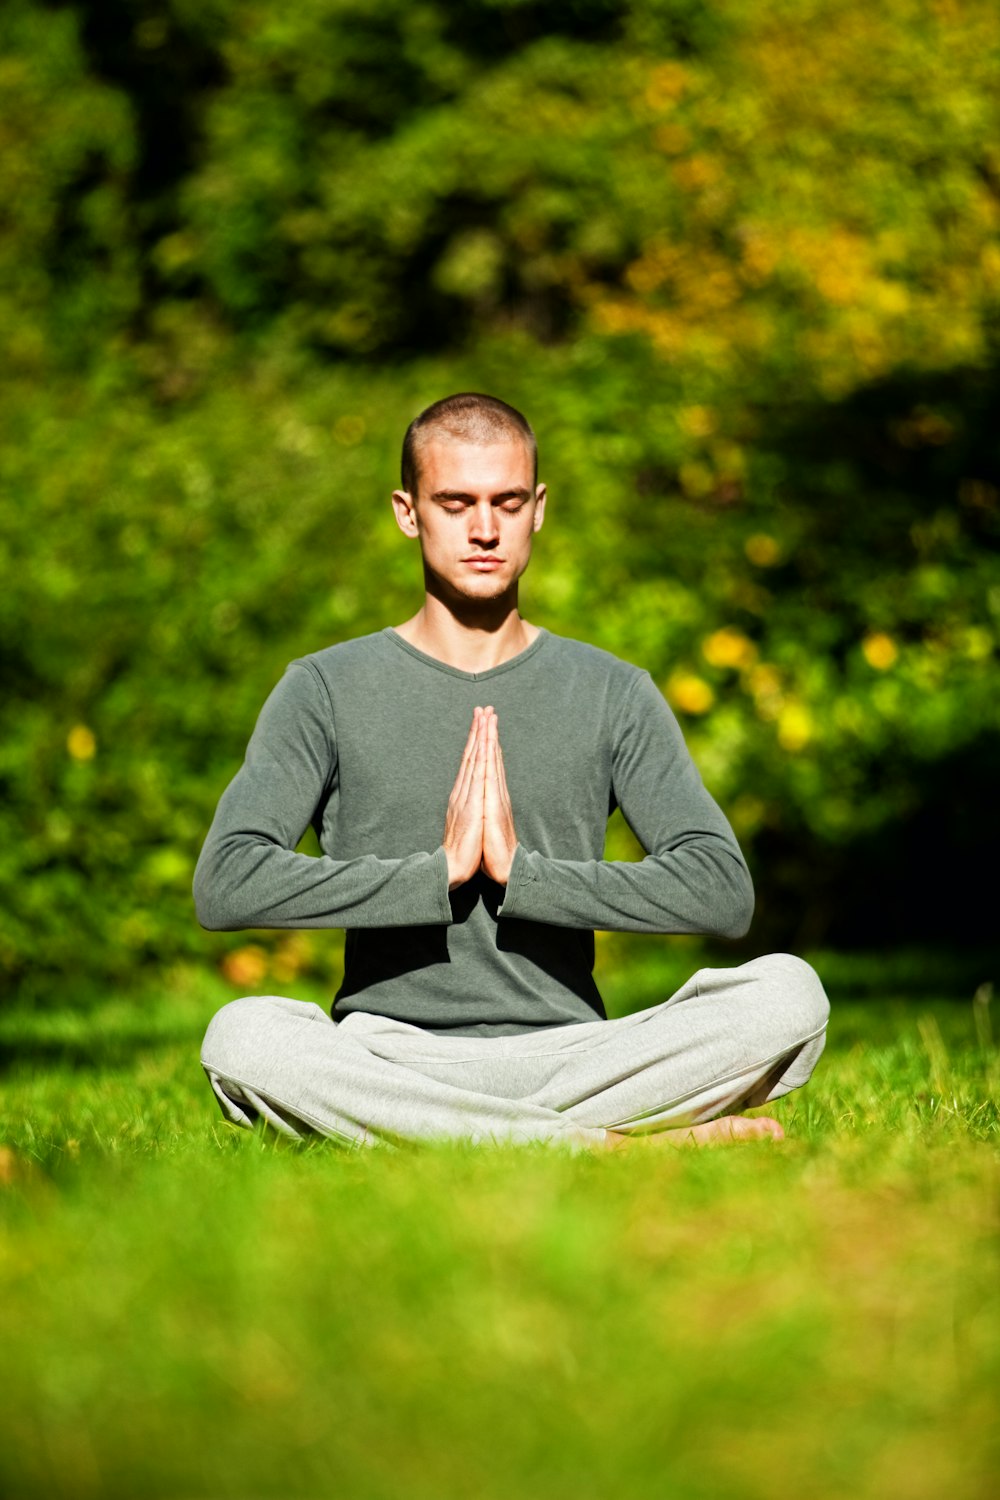 Purpose Of Yoga And Its Benefits To One's Body And Mind